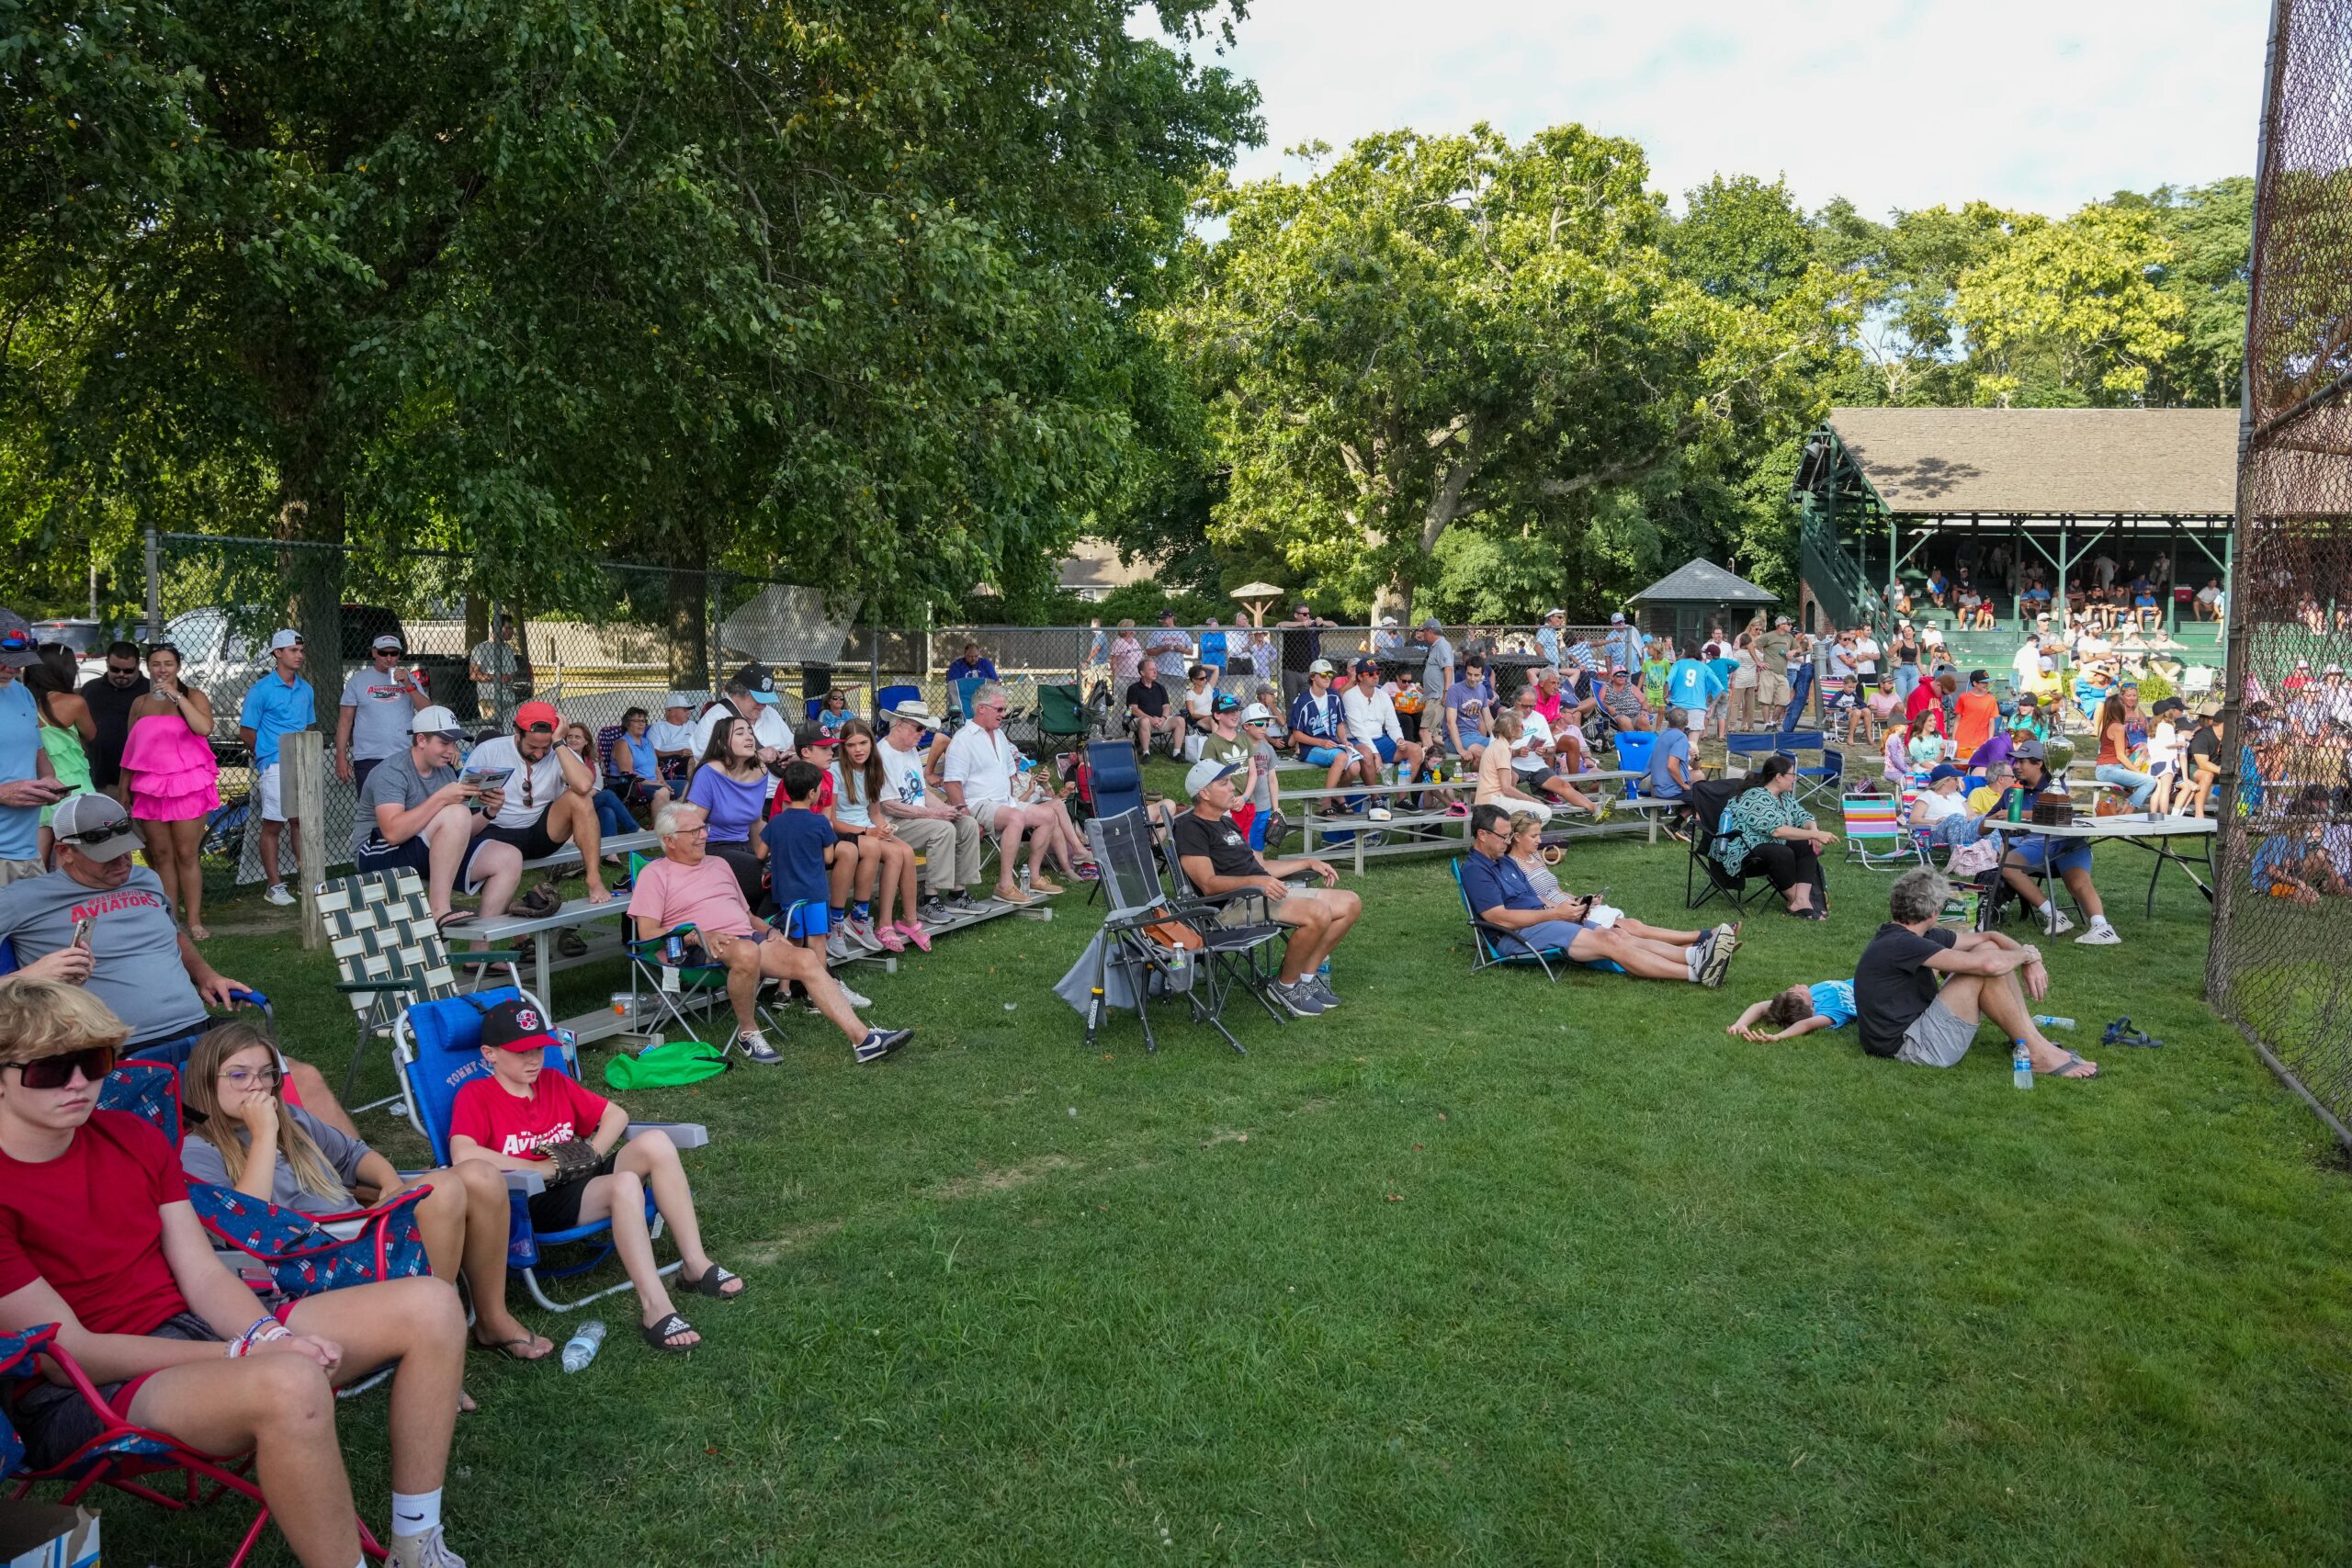 A large crowd took on the final game of the HCBL season at Mashashimuet Park in Sag Harbor on Sunday.     RON ESPOSITO